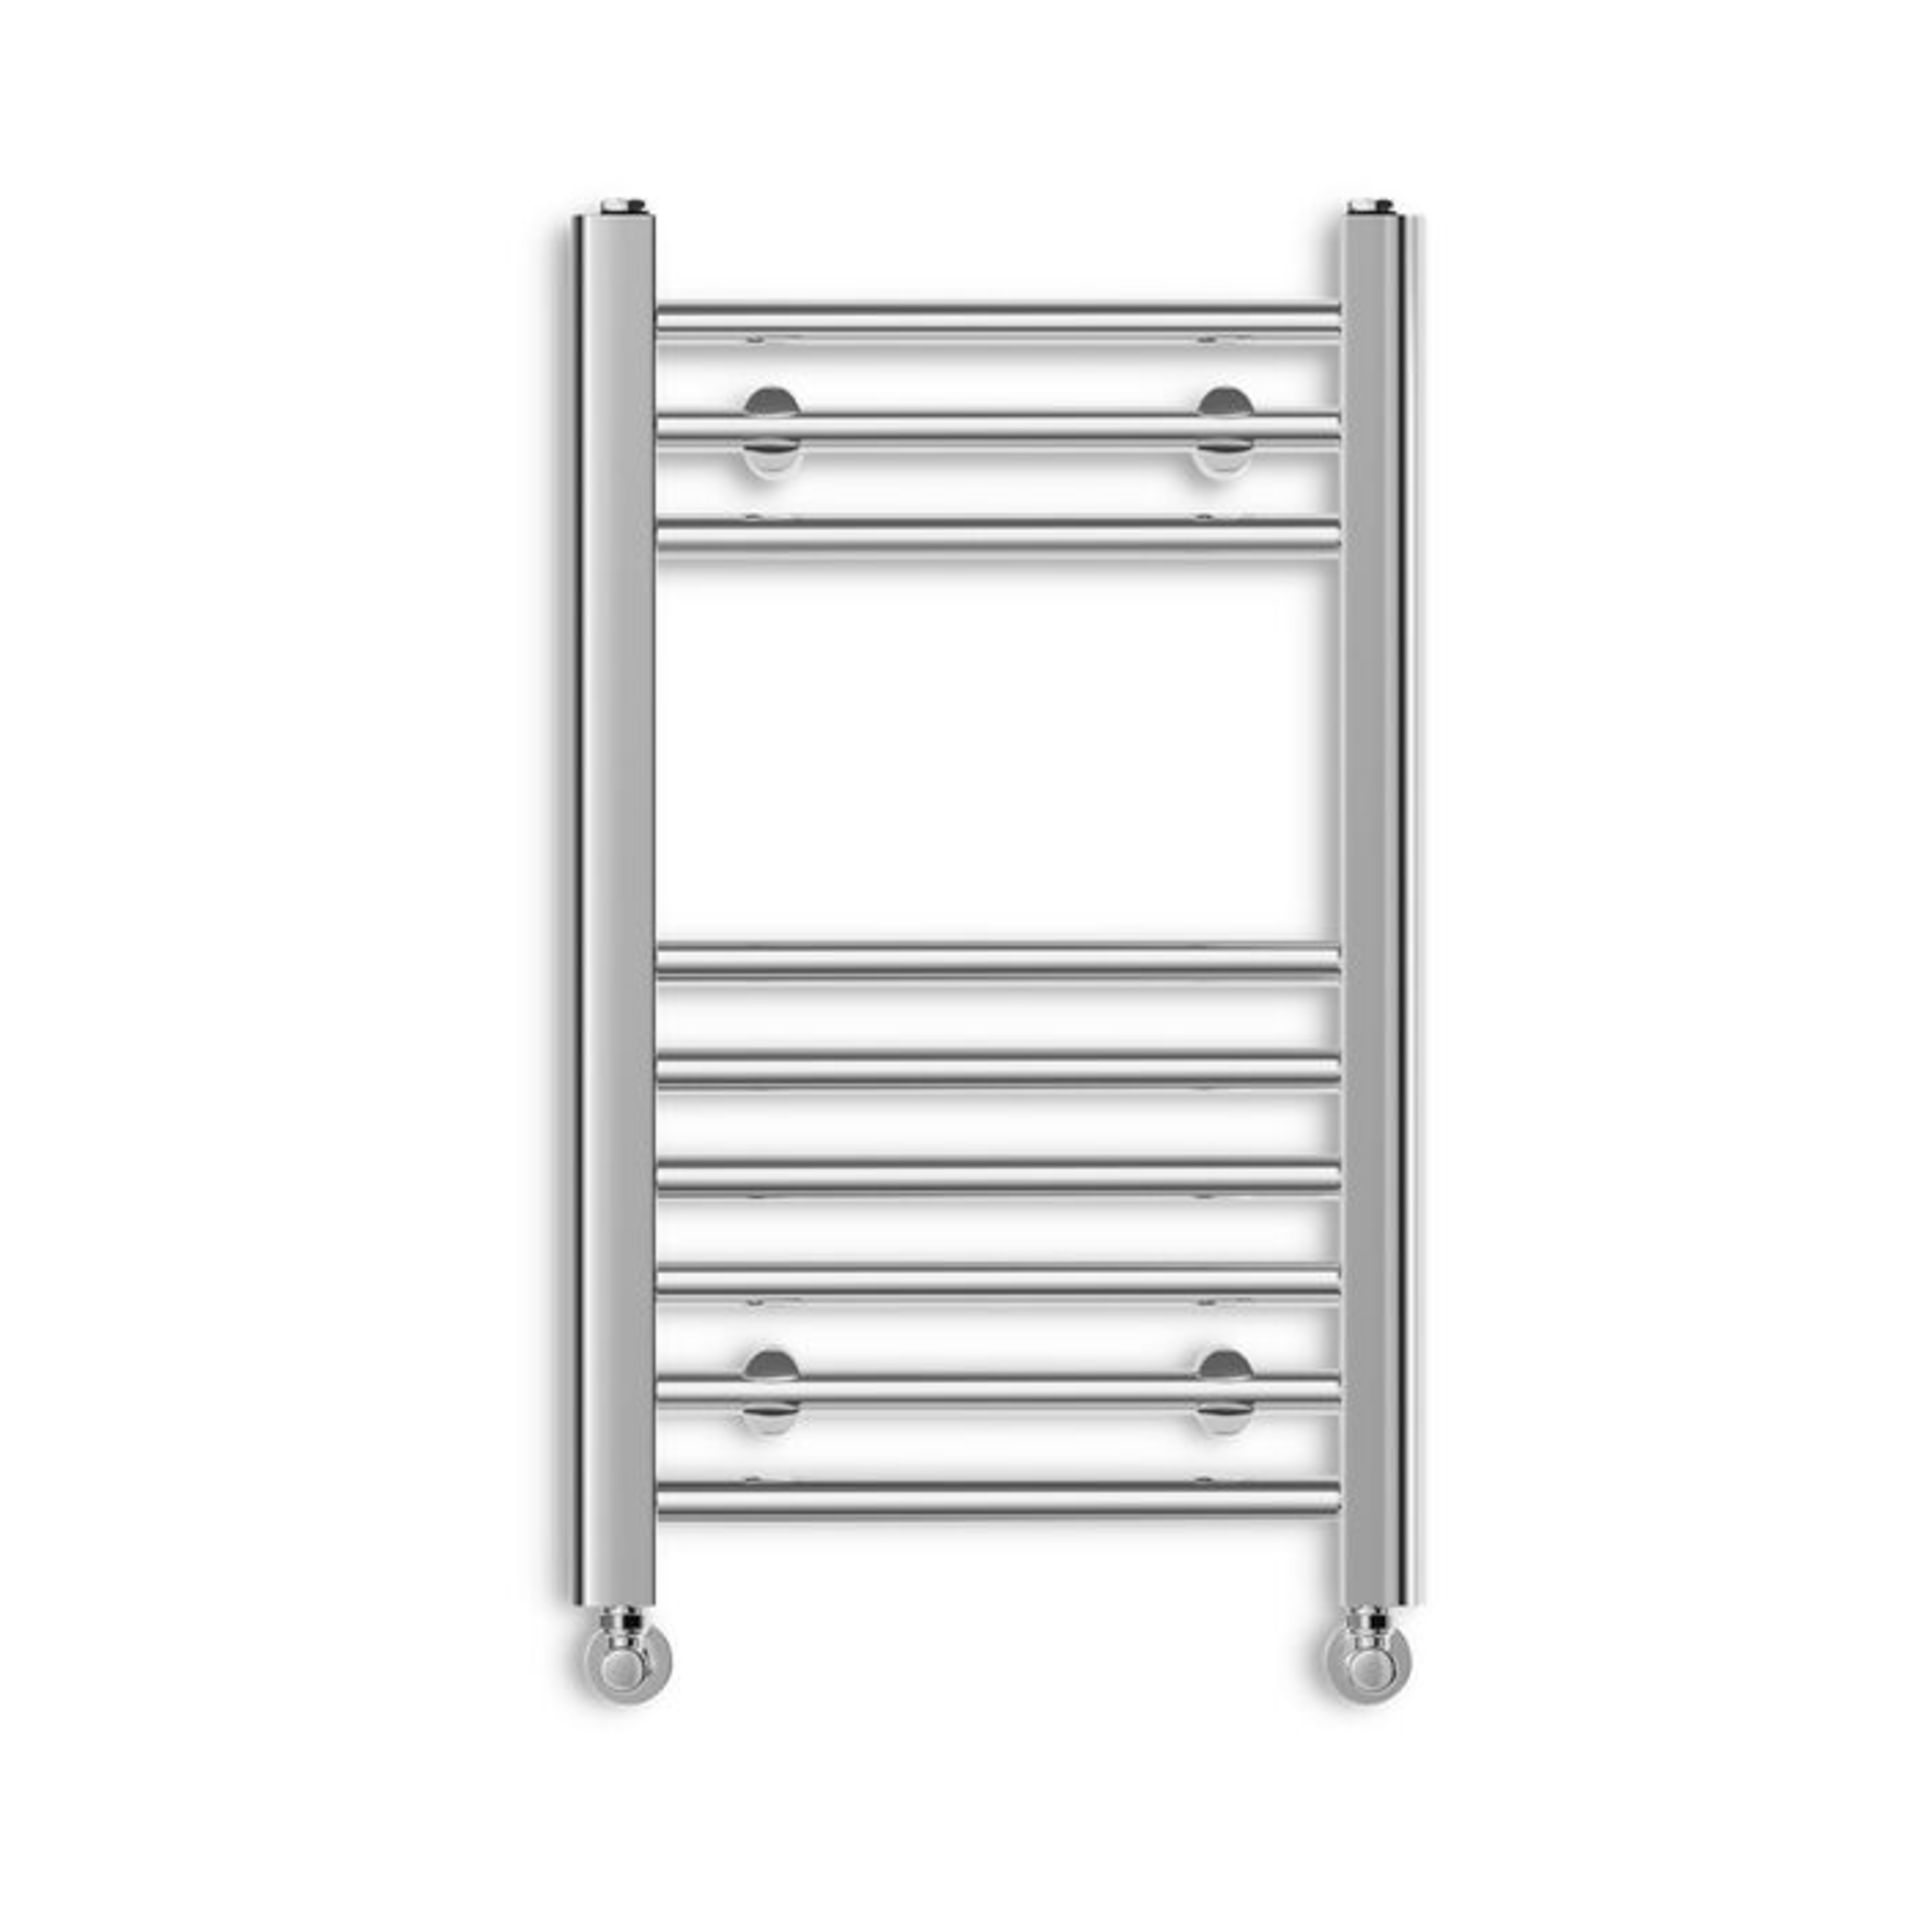 (G145) 650x400mm Straight Heated Towel Radiator. Low carbon steel chrome plated radiator. This... - Image 2 of 2